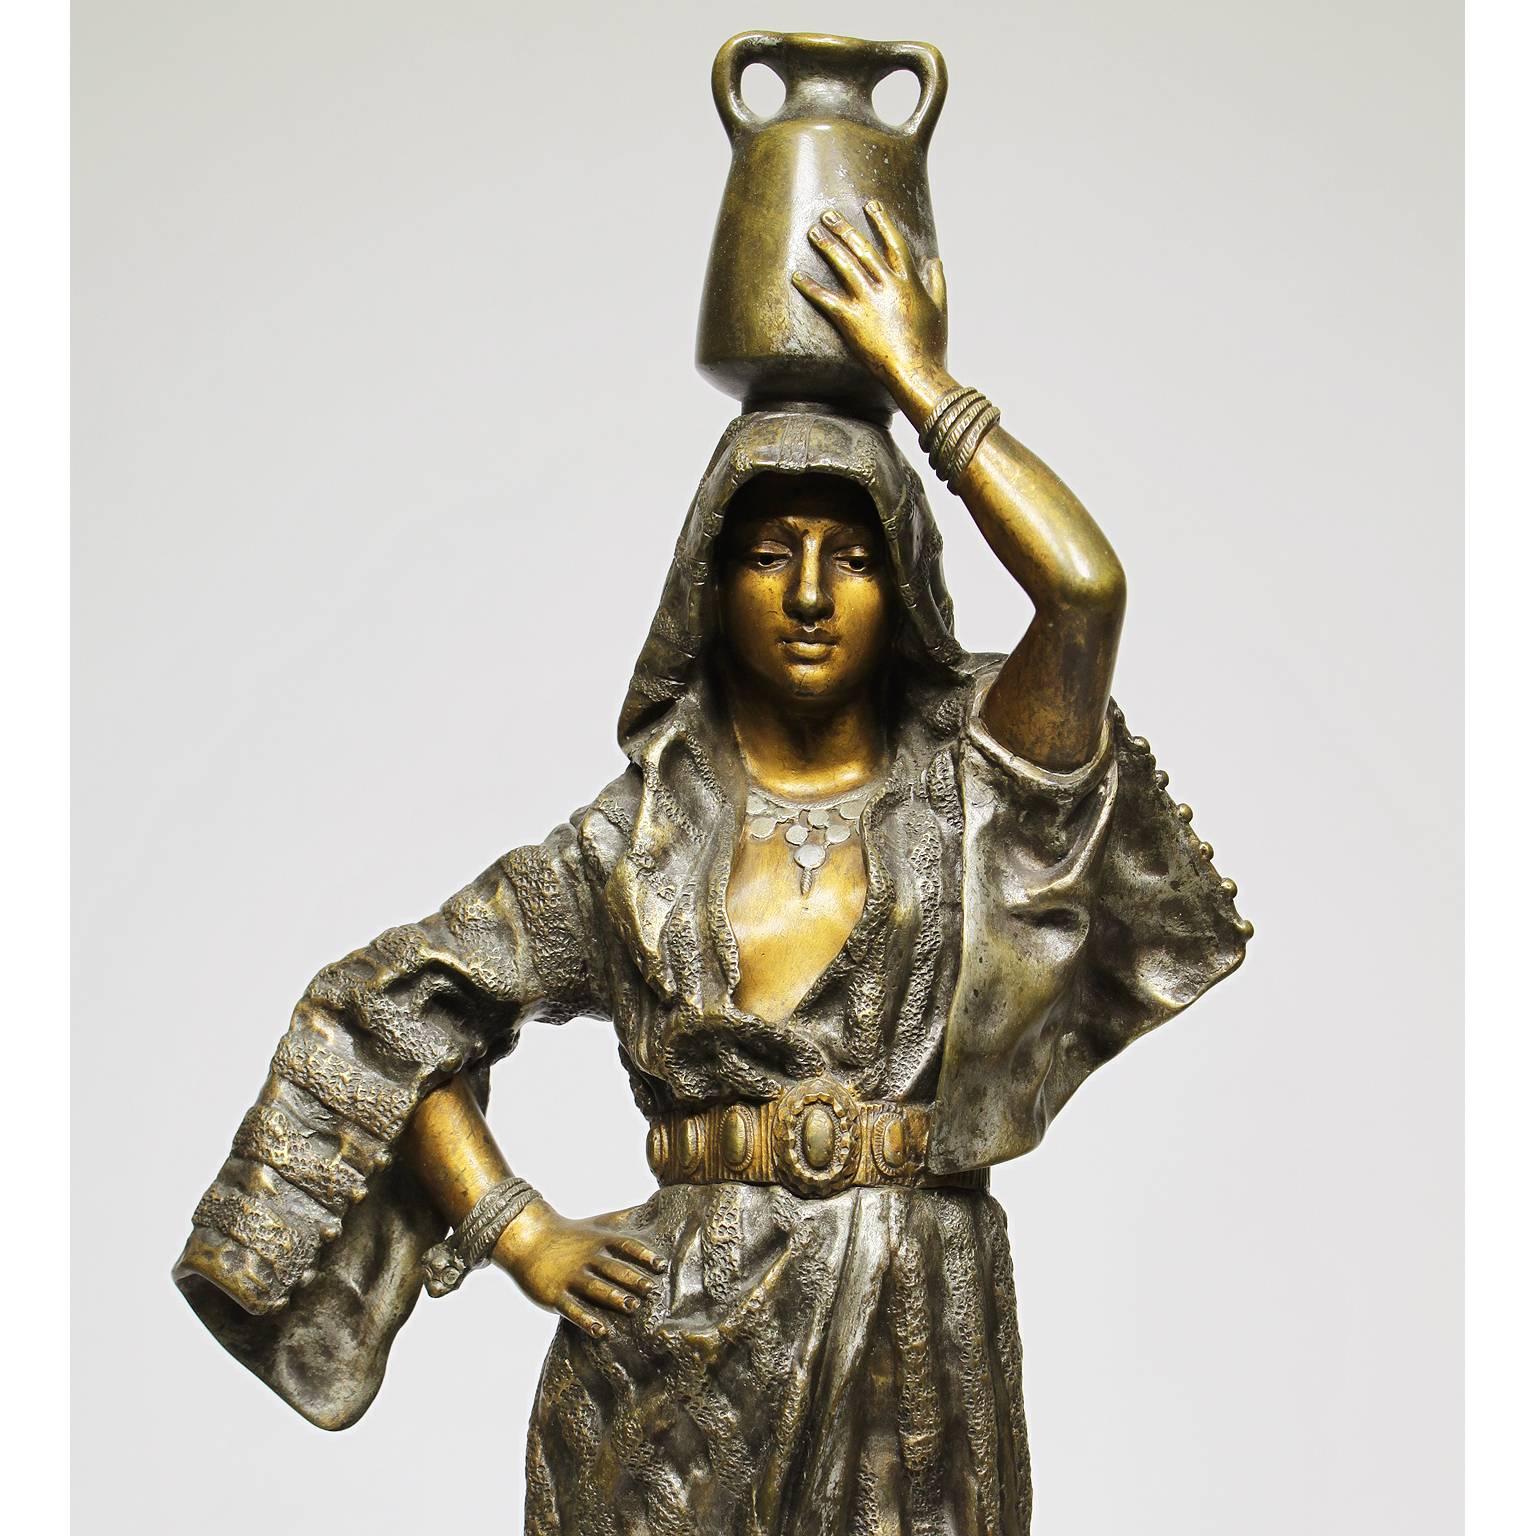 A fine French 19th-20th century orientalist silvered and gilt patinated bronze sculpture of 